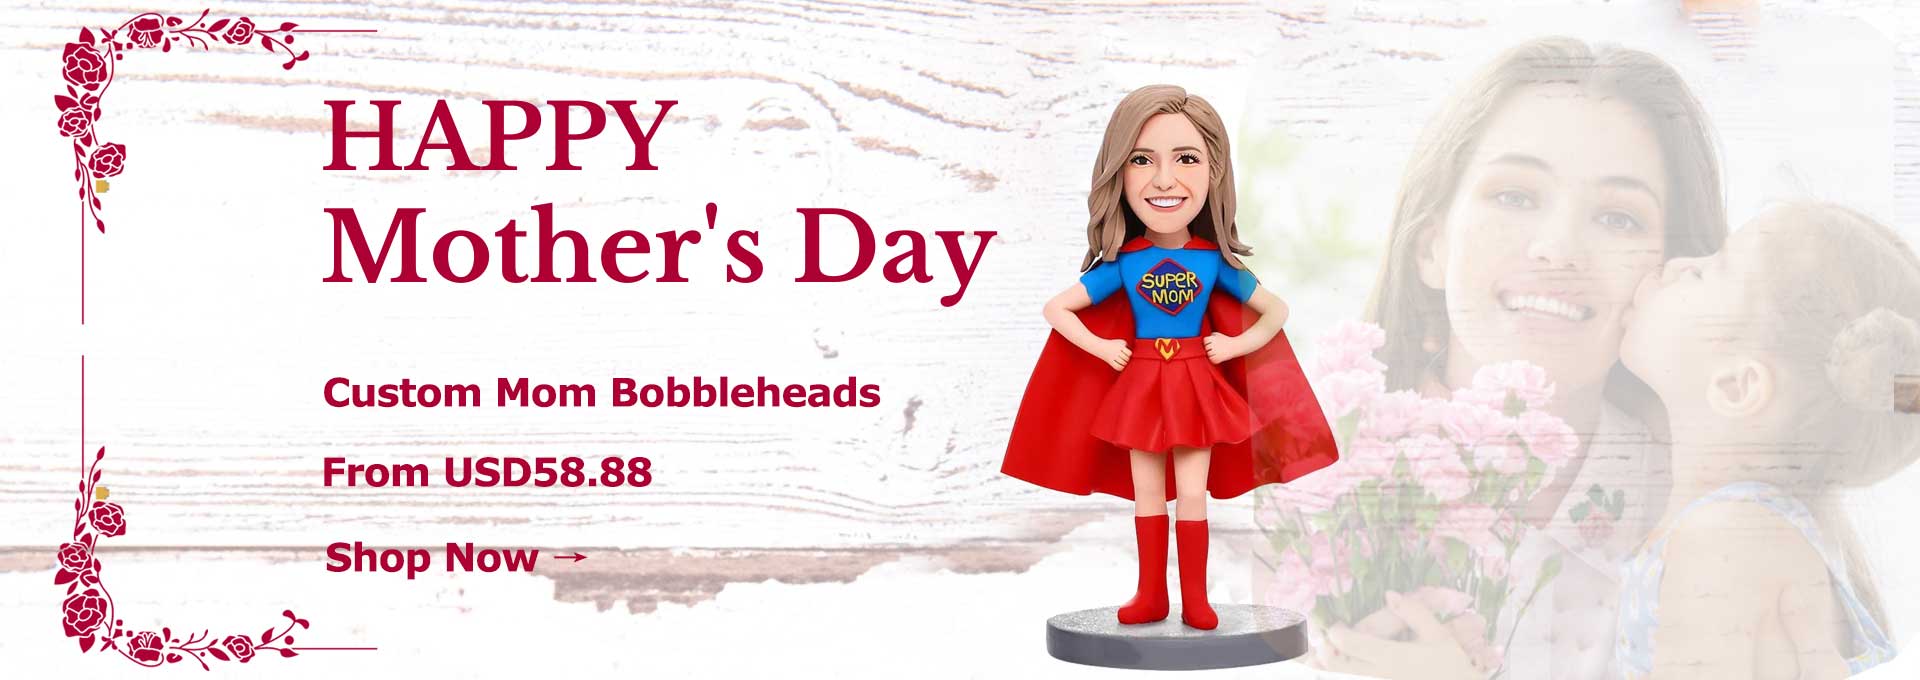 Your Mom Deserves A Custom Bobblehead On Mother's Day!